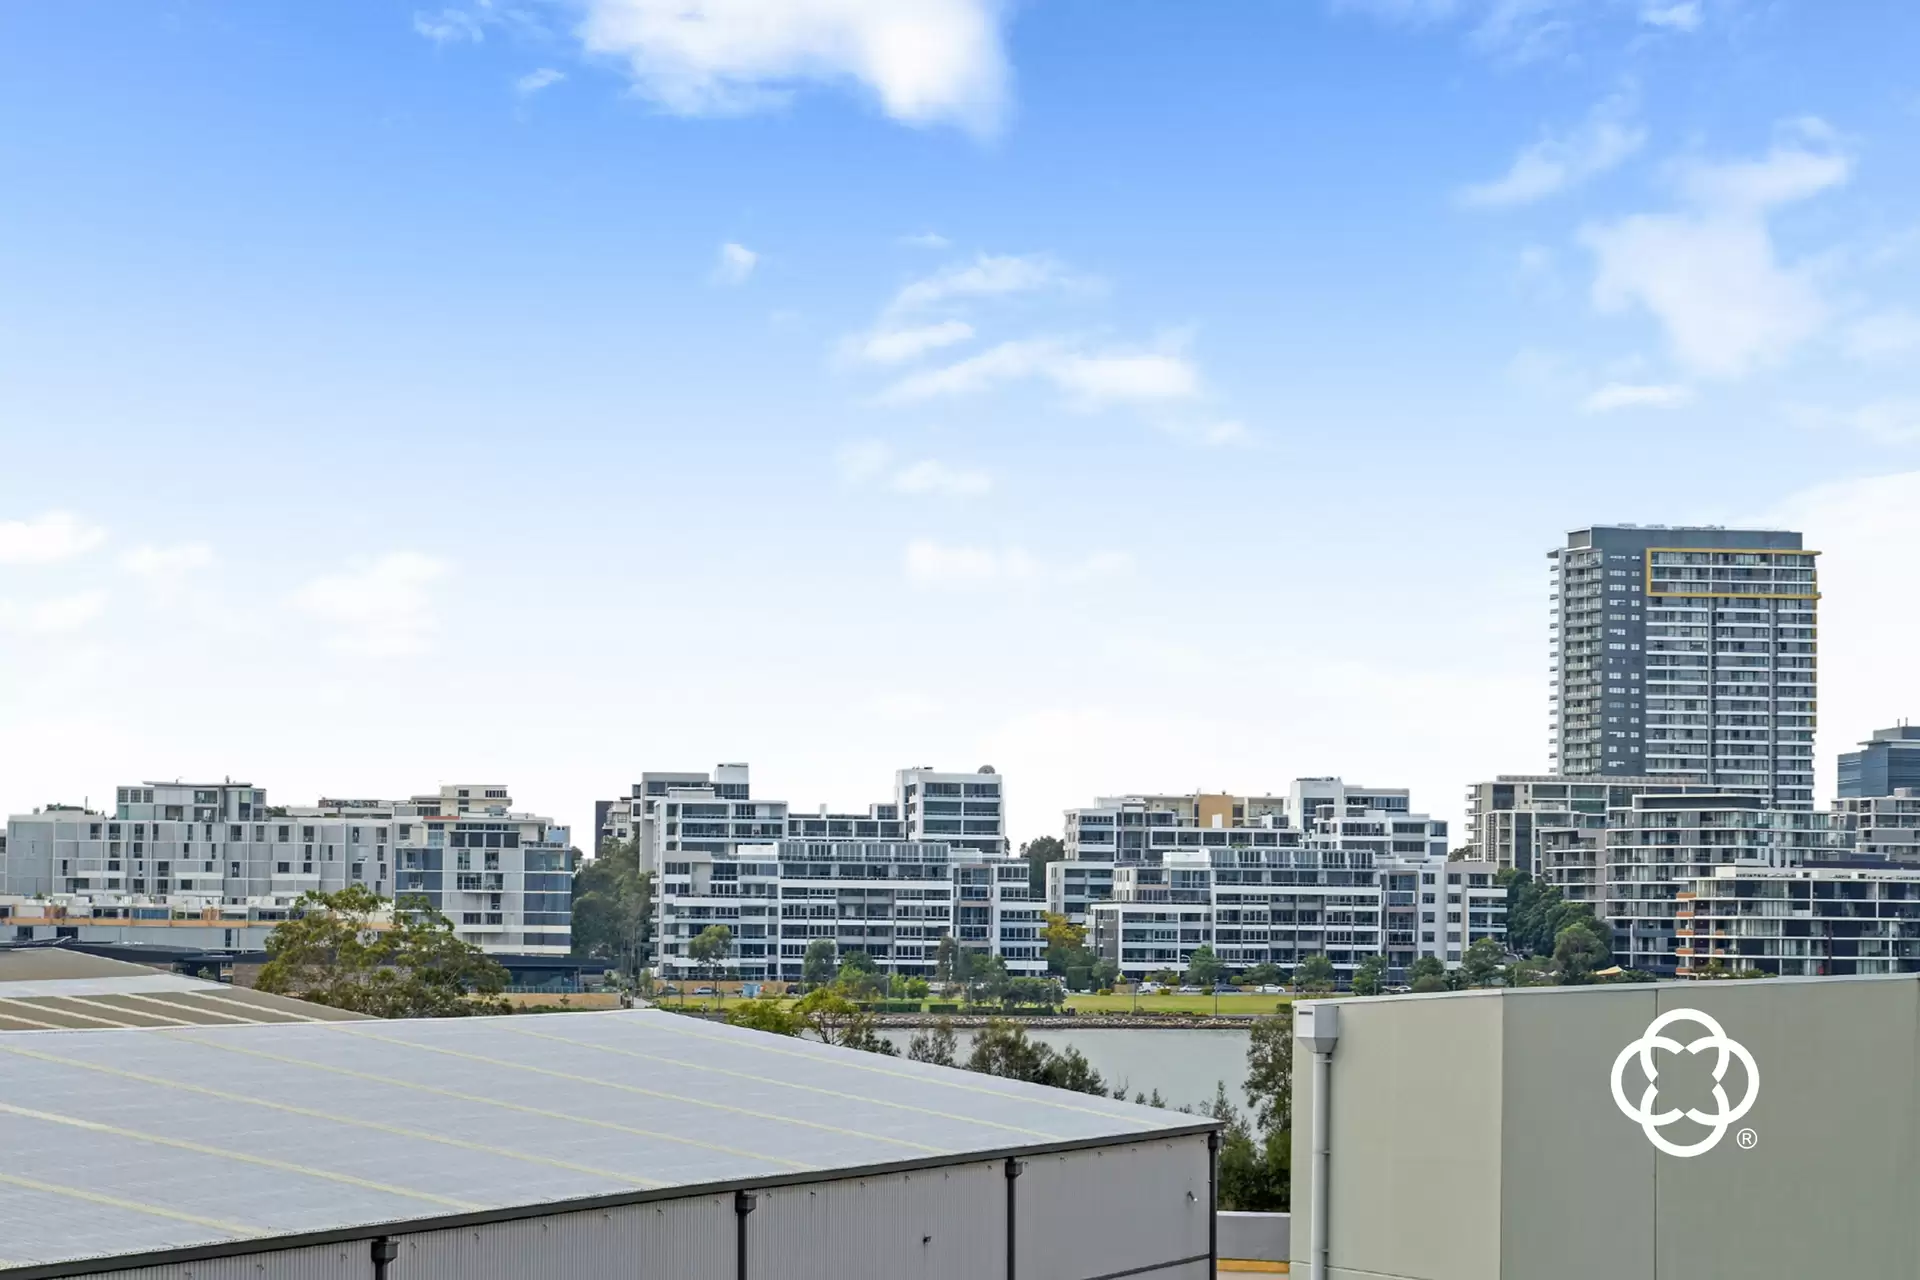 415/14 Nuvolari Place, Wentworth Point Leased by Chidiac Realty - image 1